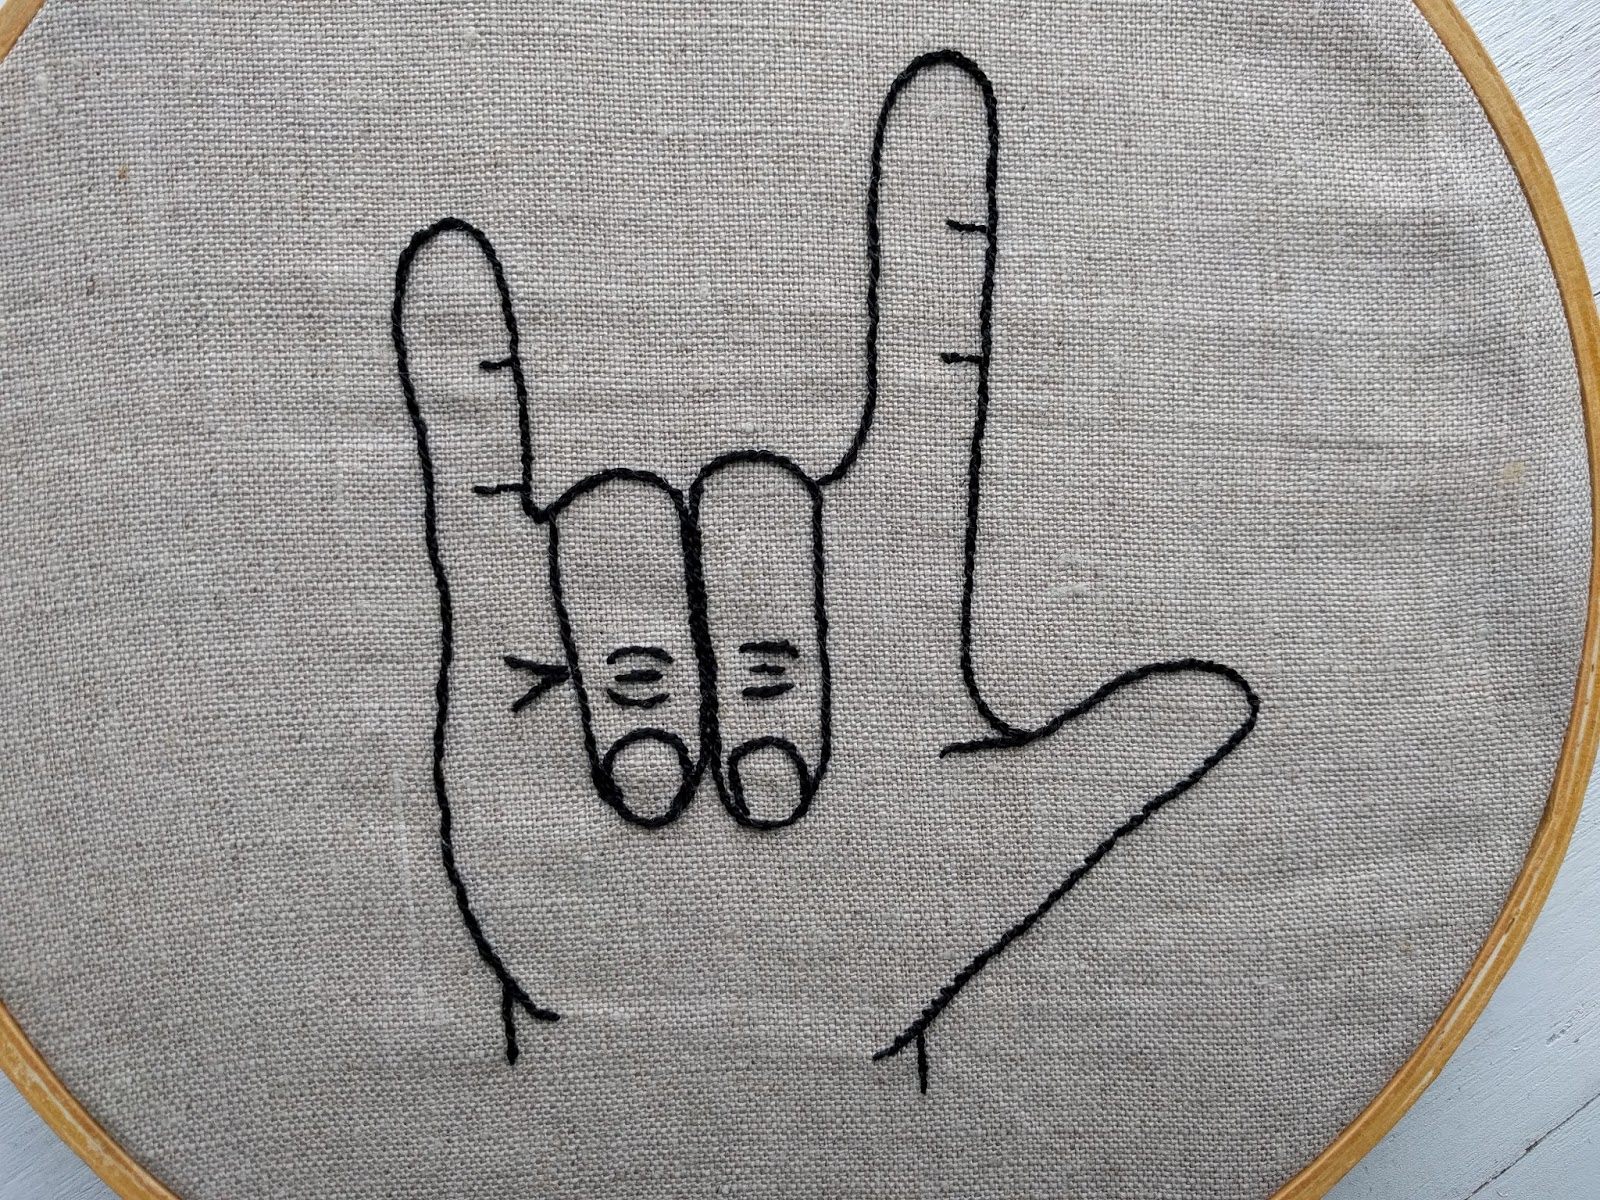 Free Hand Embroidery Patterns A Lively Hope Free I Love You Hand Embroidery Pattern